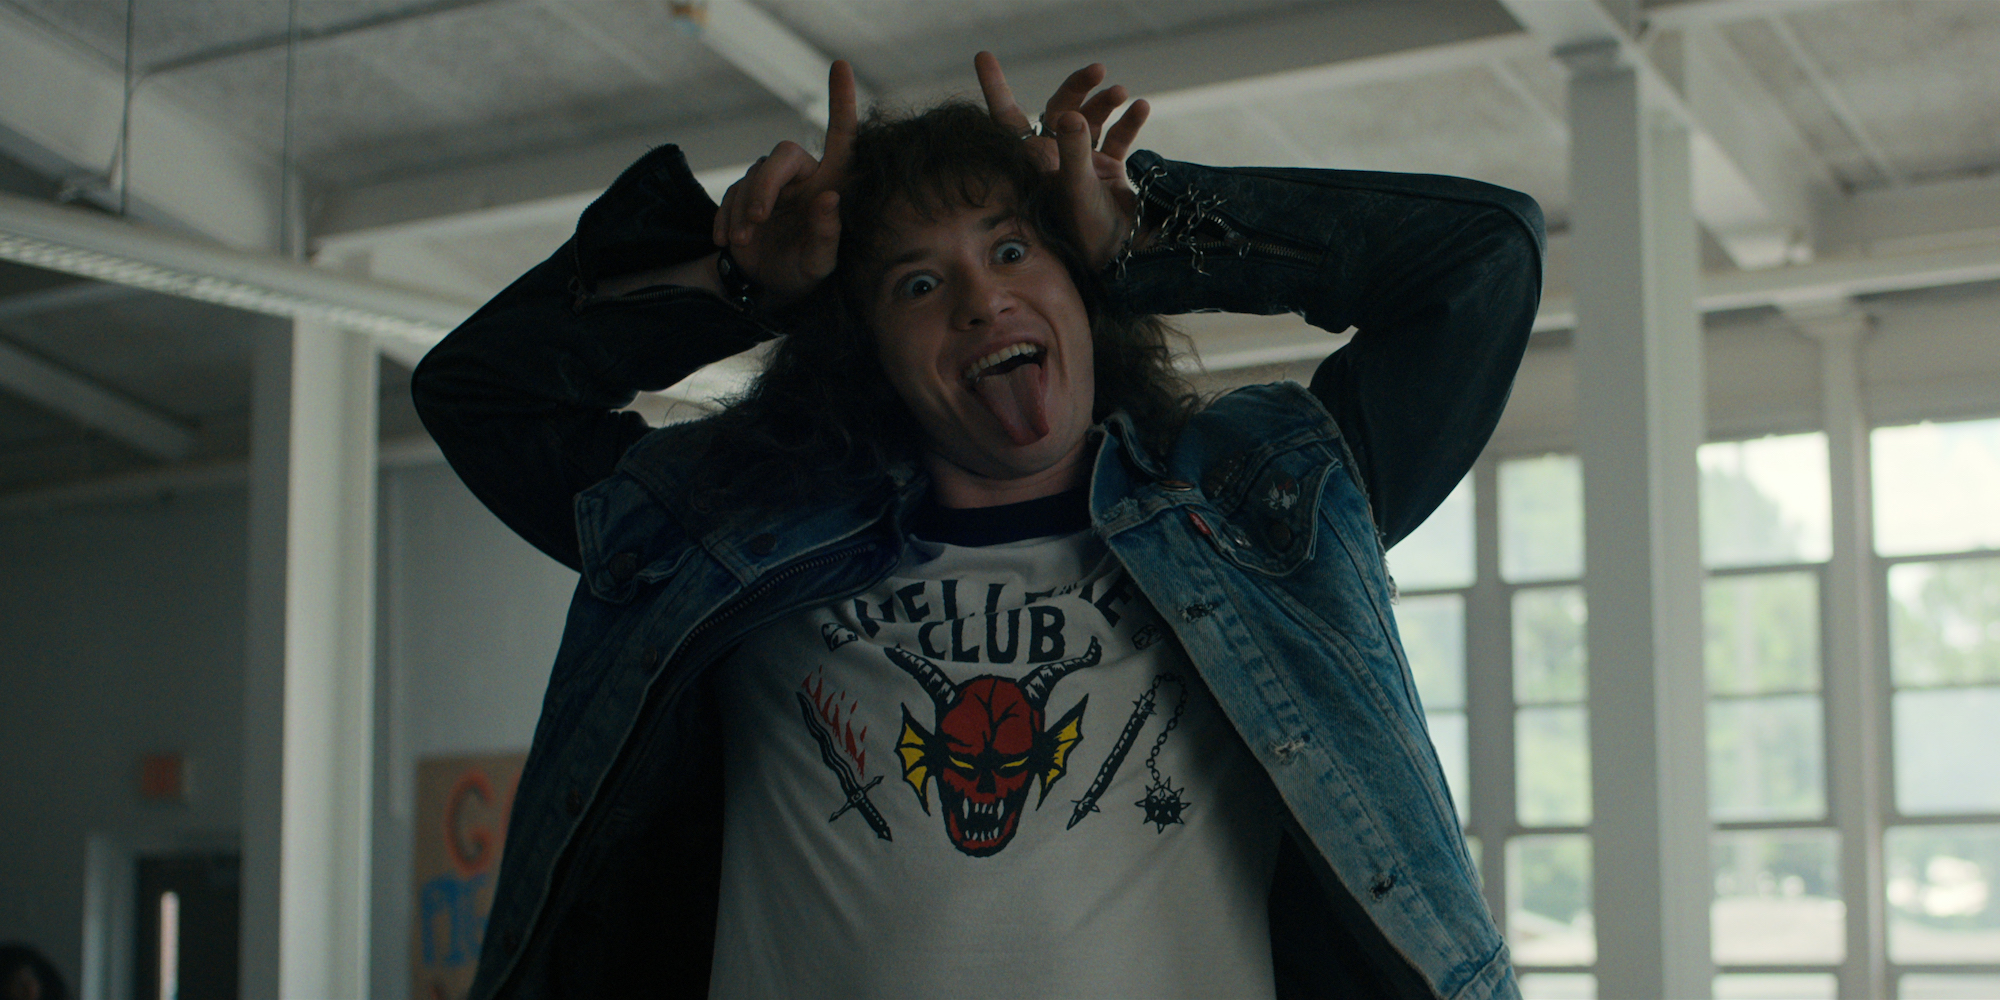 “Stranger Things” Actor Joe Quinn Prepared For Role By Listening To Lots of Heavy Metal